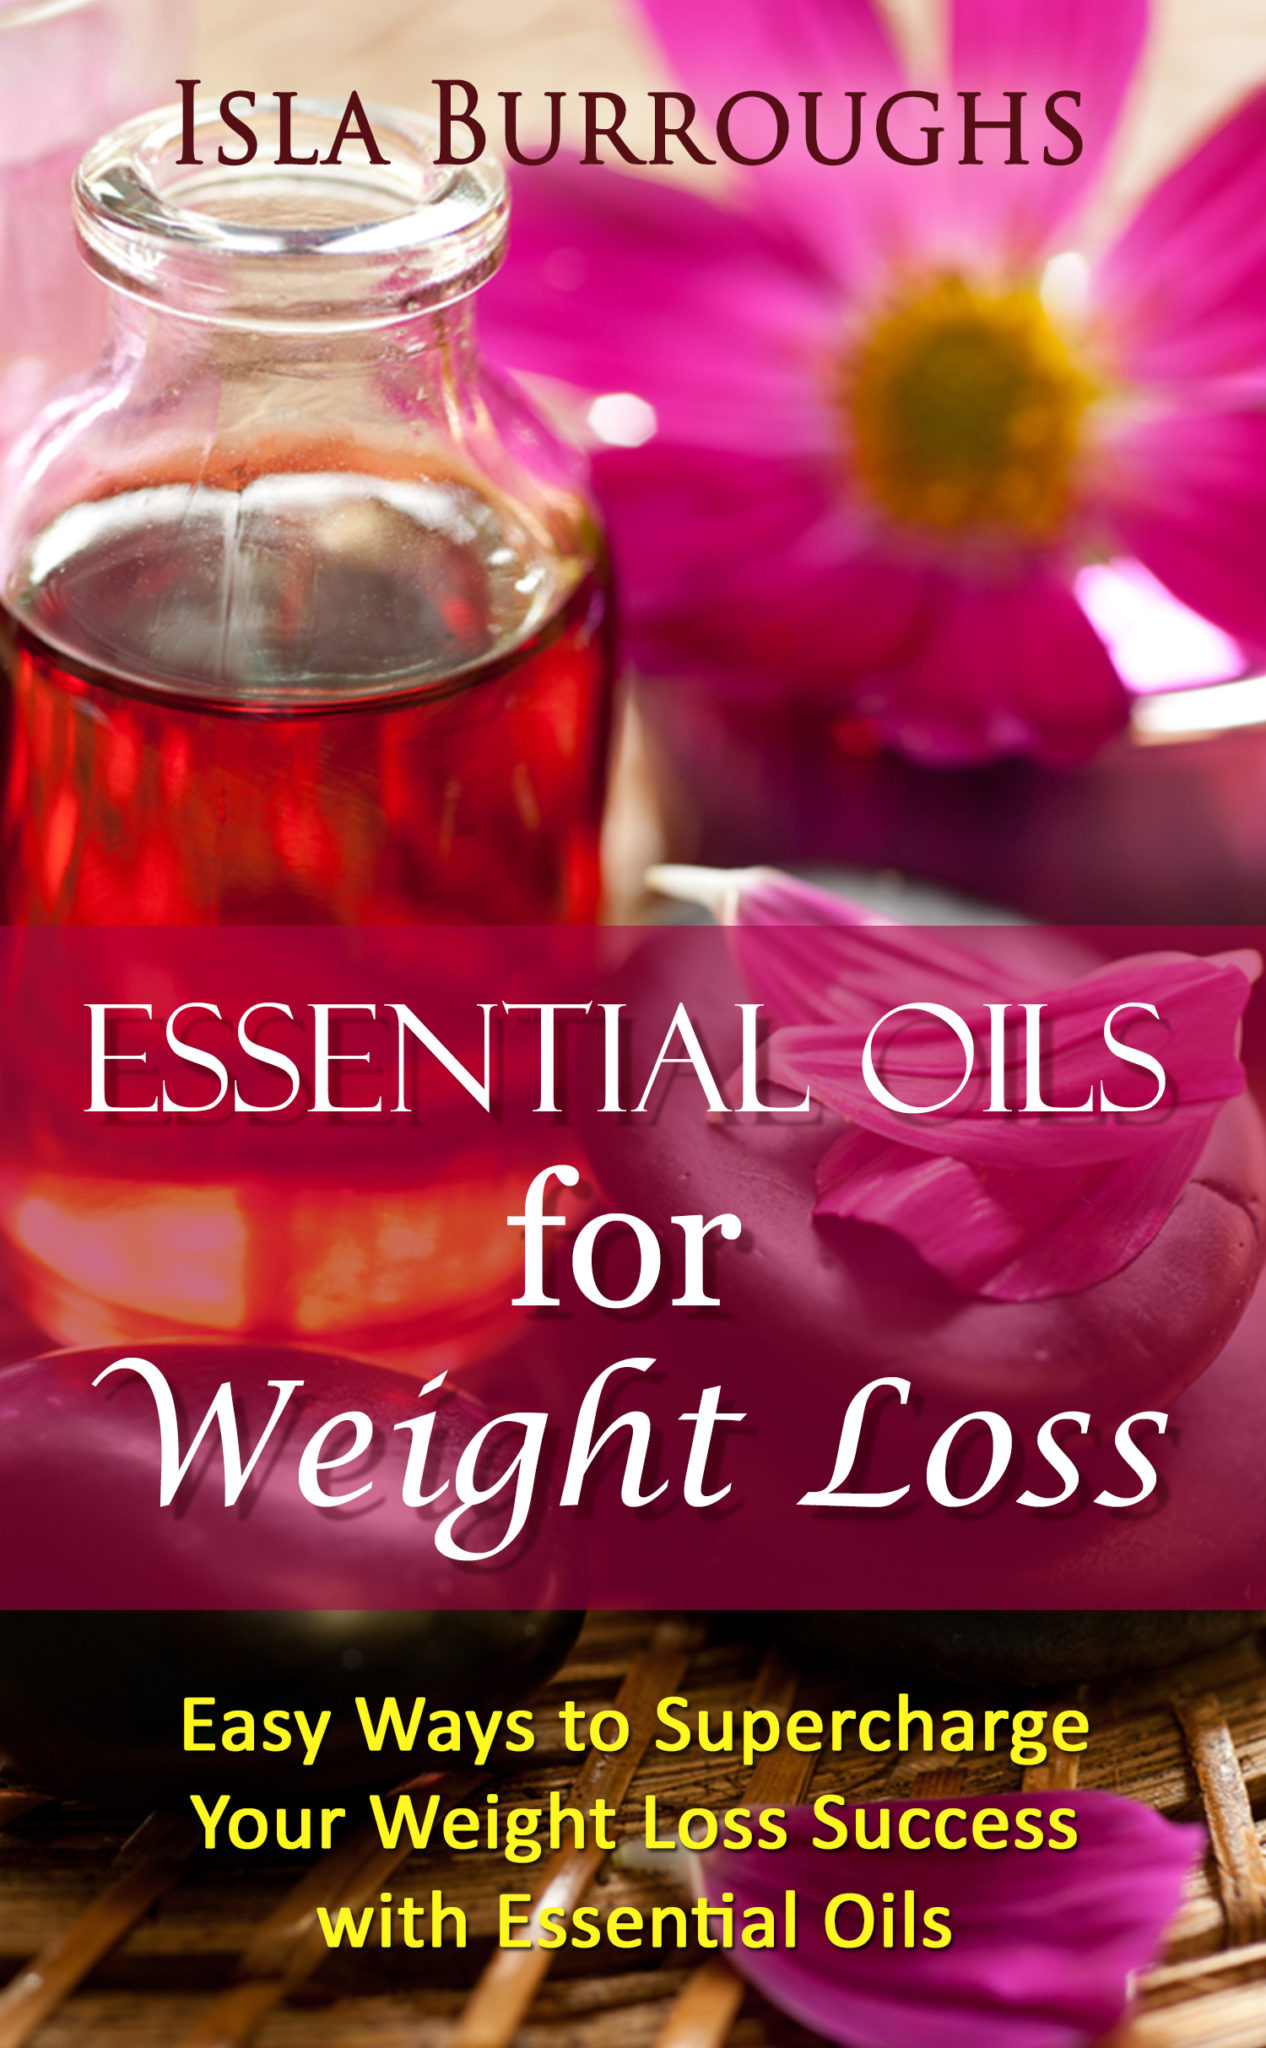 FREE: Essential Oils for Weight Loss: Easy Ways to Supercharge Your Weight Loss Success with Essential Oils by Isla Burroughs